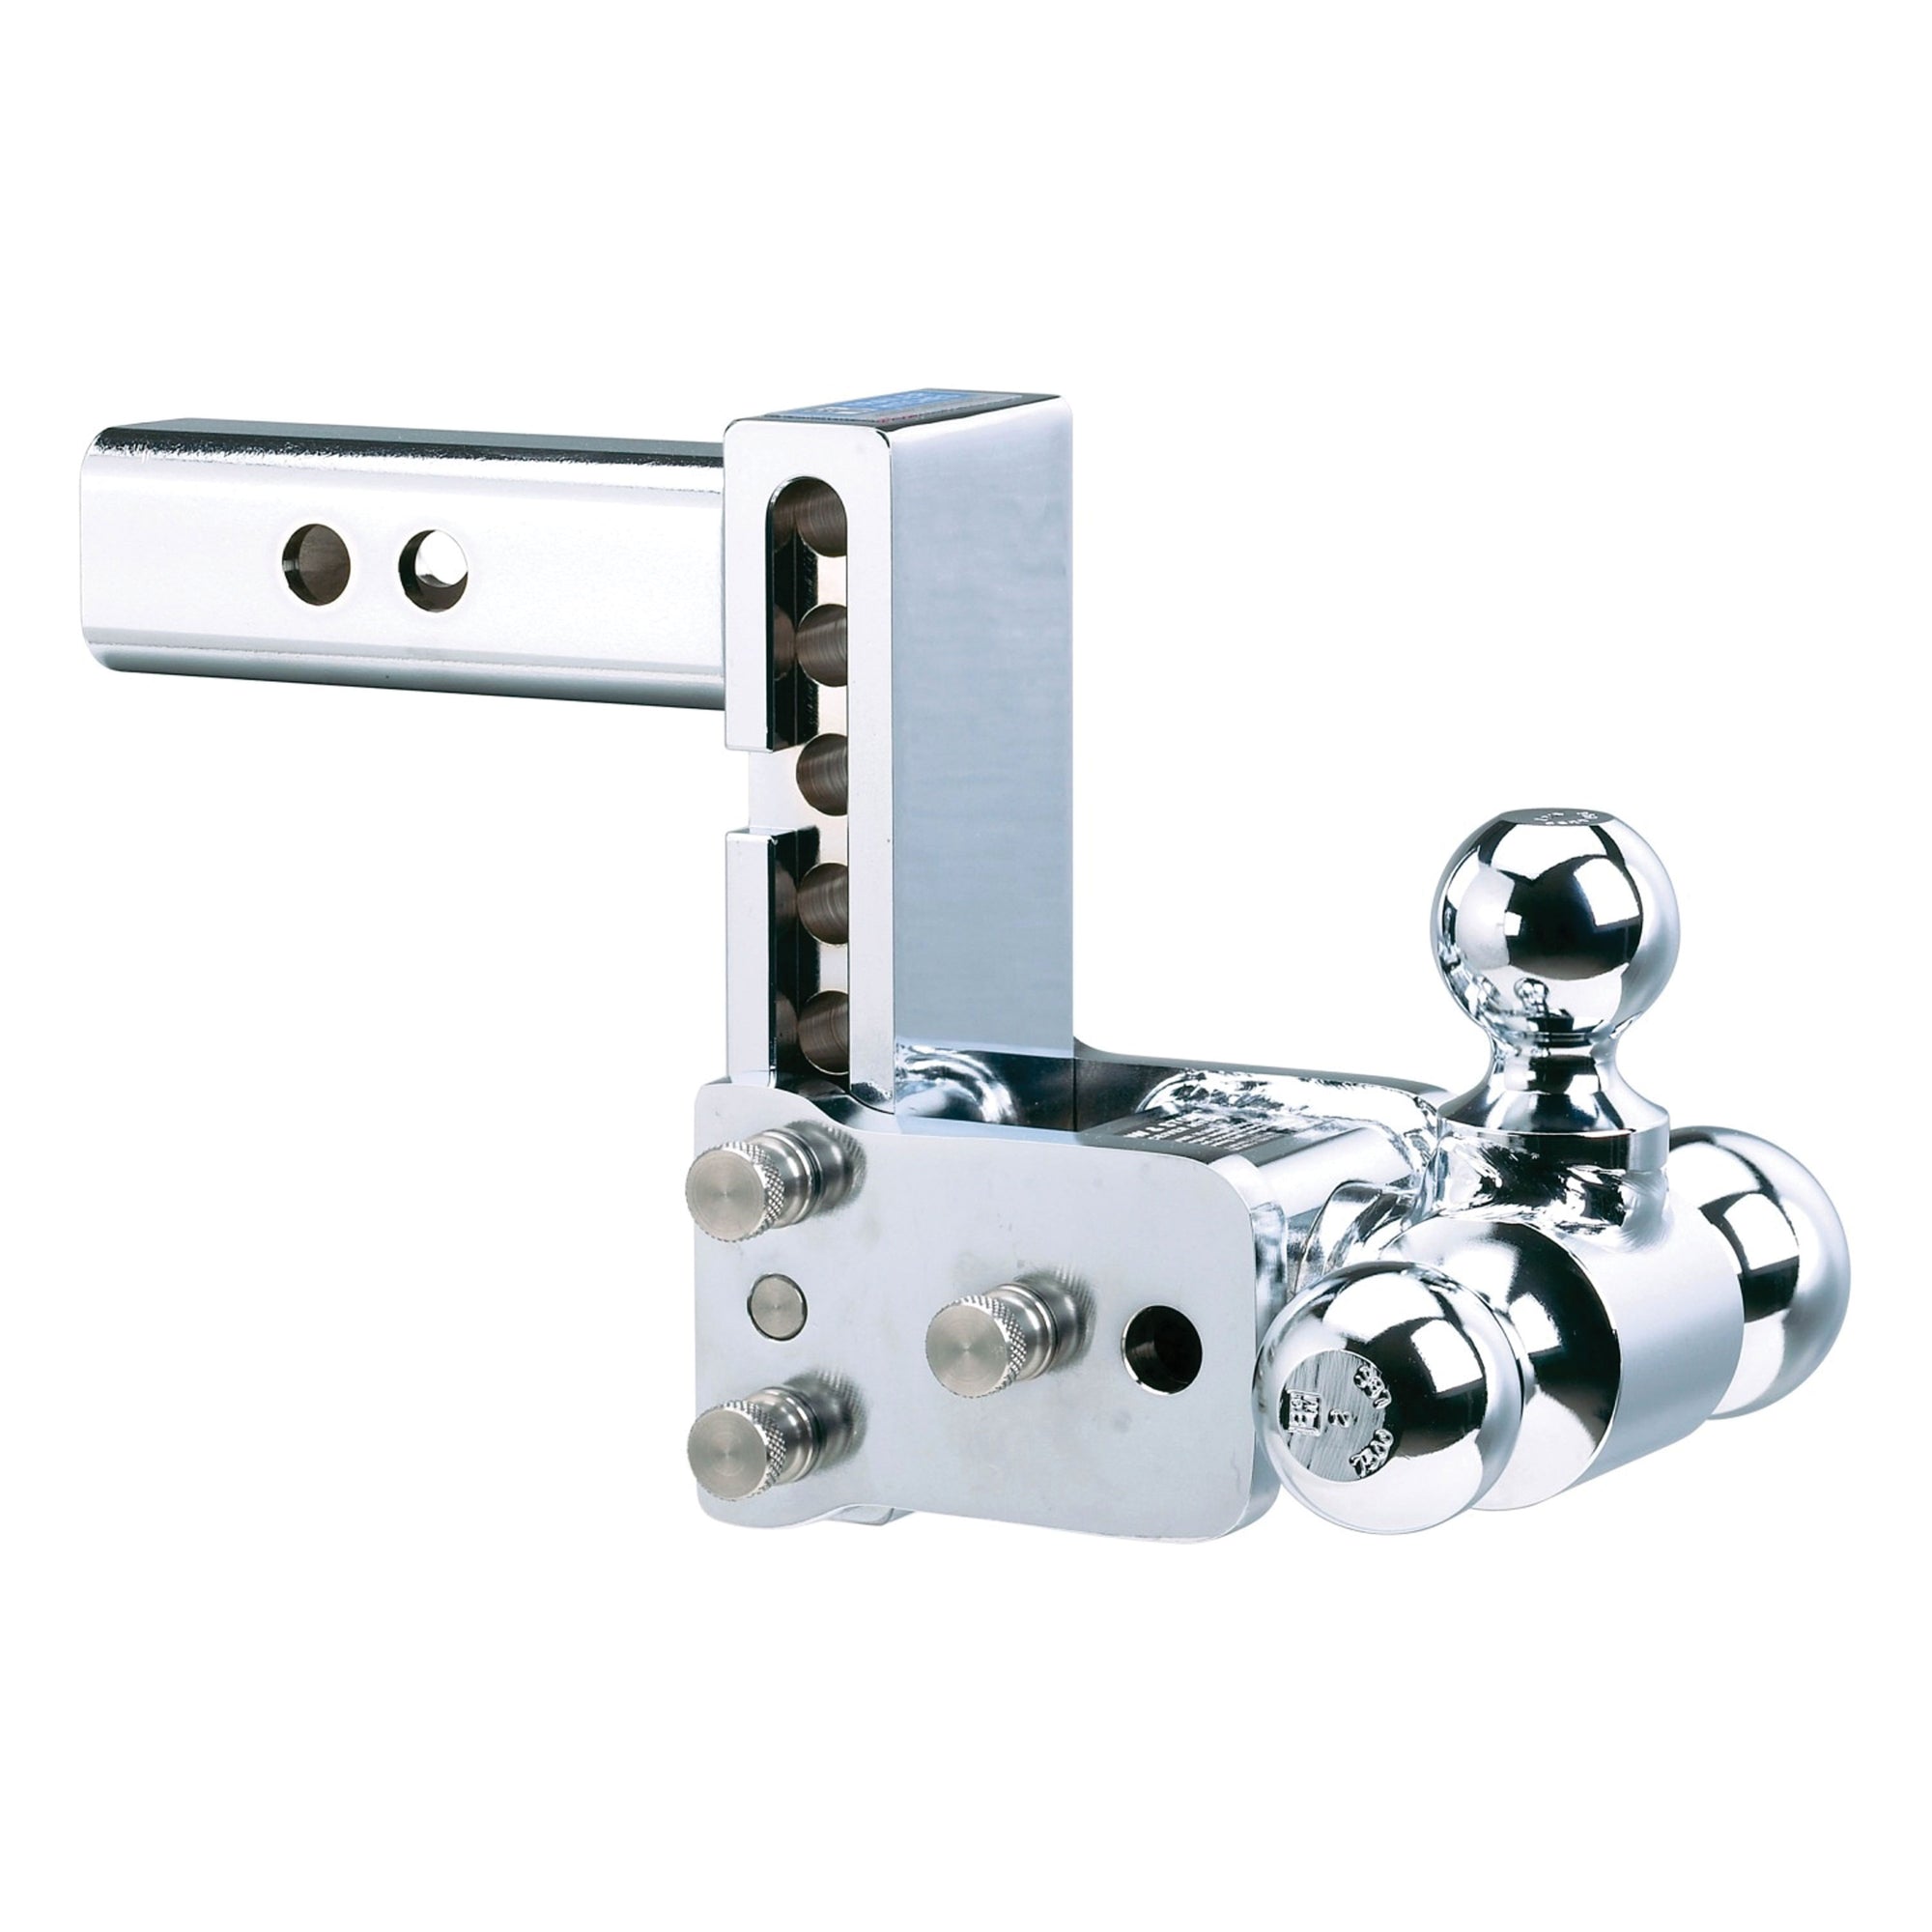 B&W Trailer Hitches TS10049C Tow and Stow Adjustable Ball Mount - 1-7/8", 2" & 2-5/16" Ball, 7" Drop, 7.5" Rise, Chrome